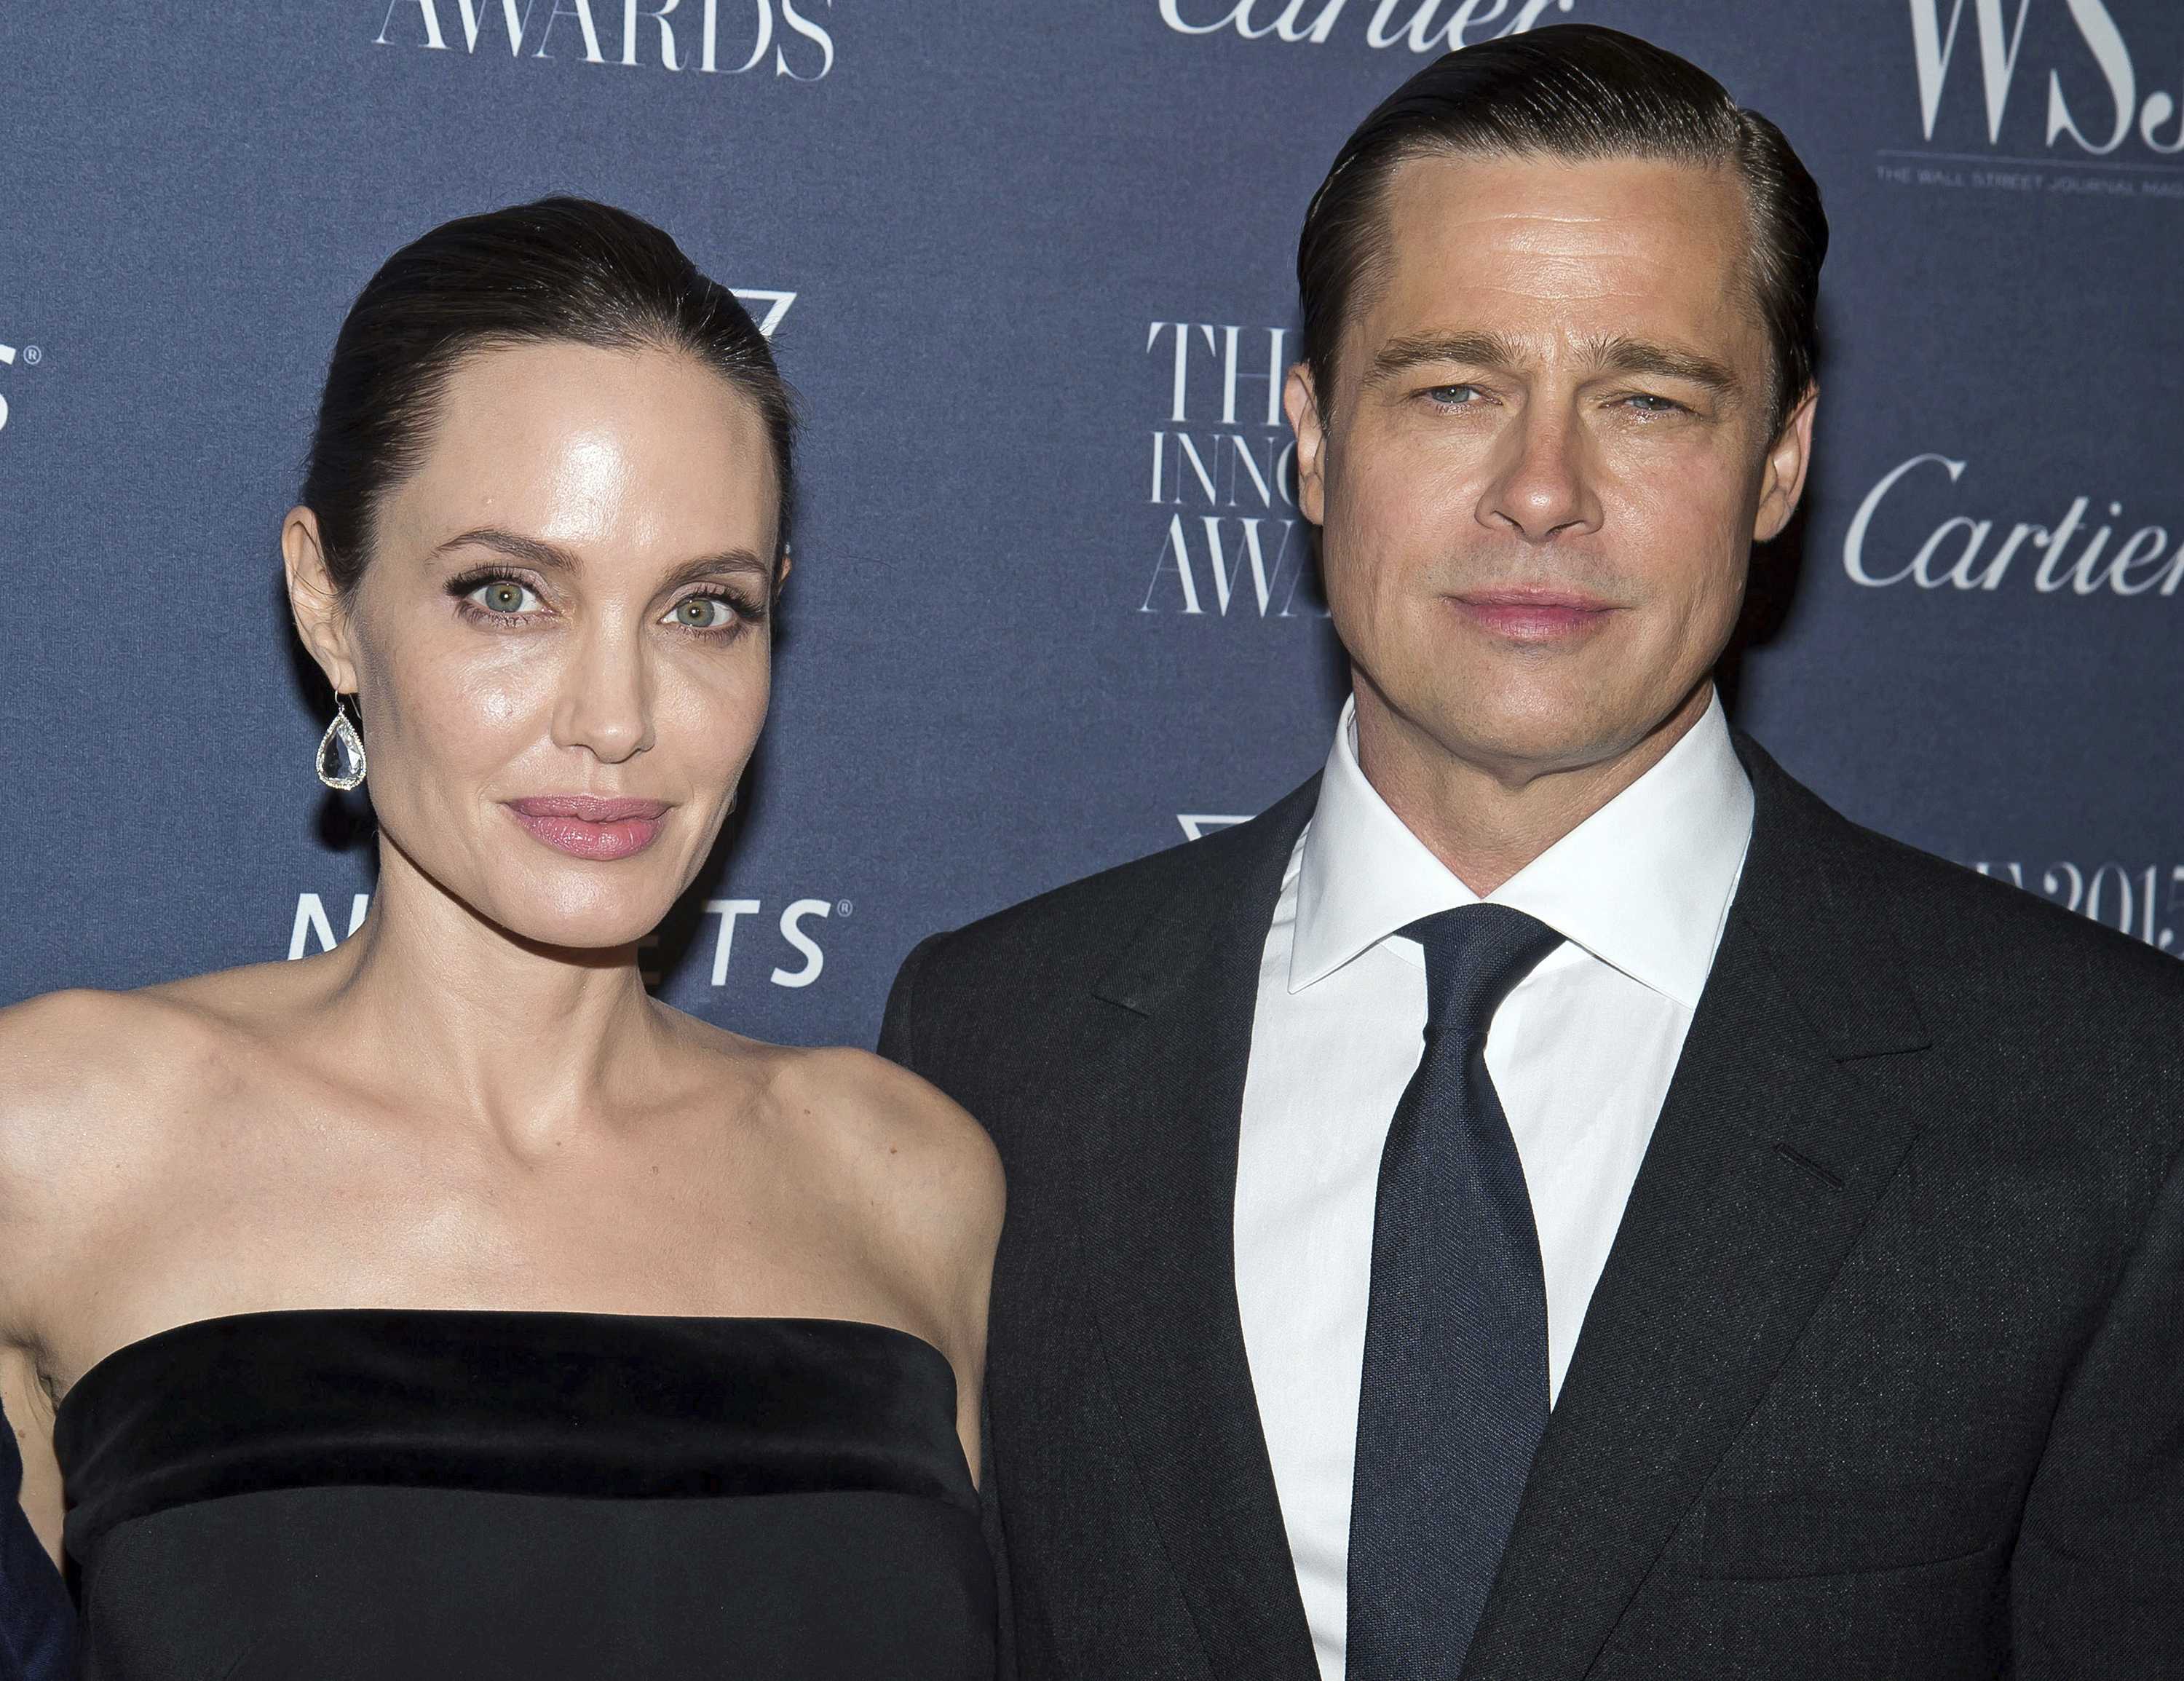 Brad and Angelina called it quits in September 2016